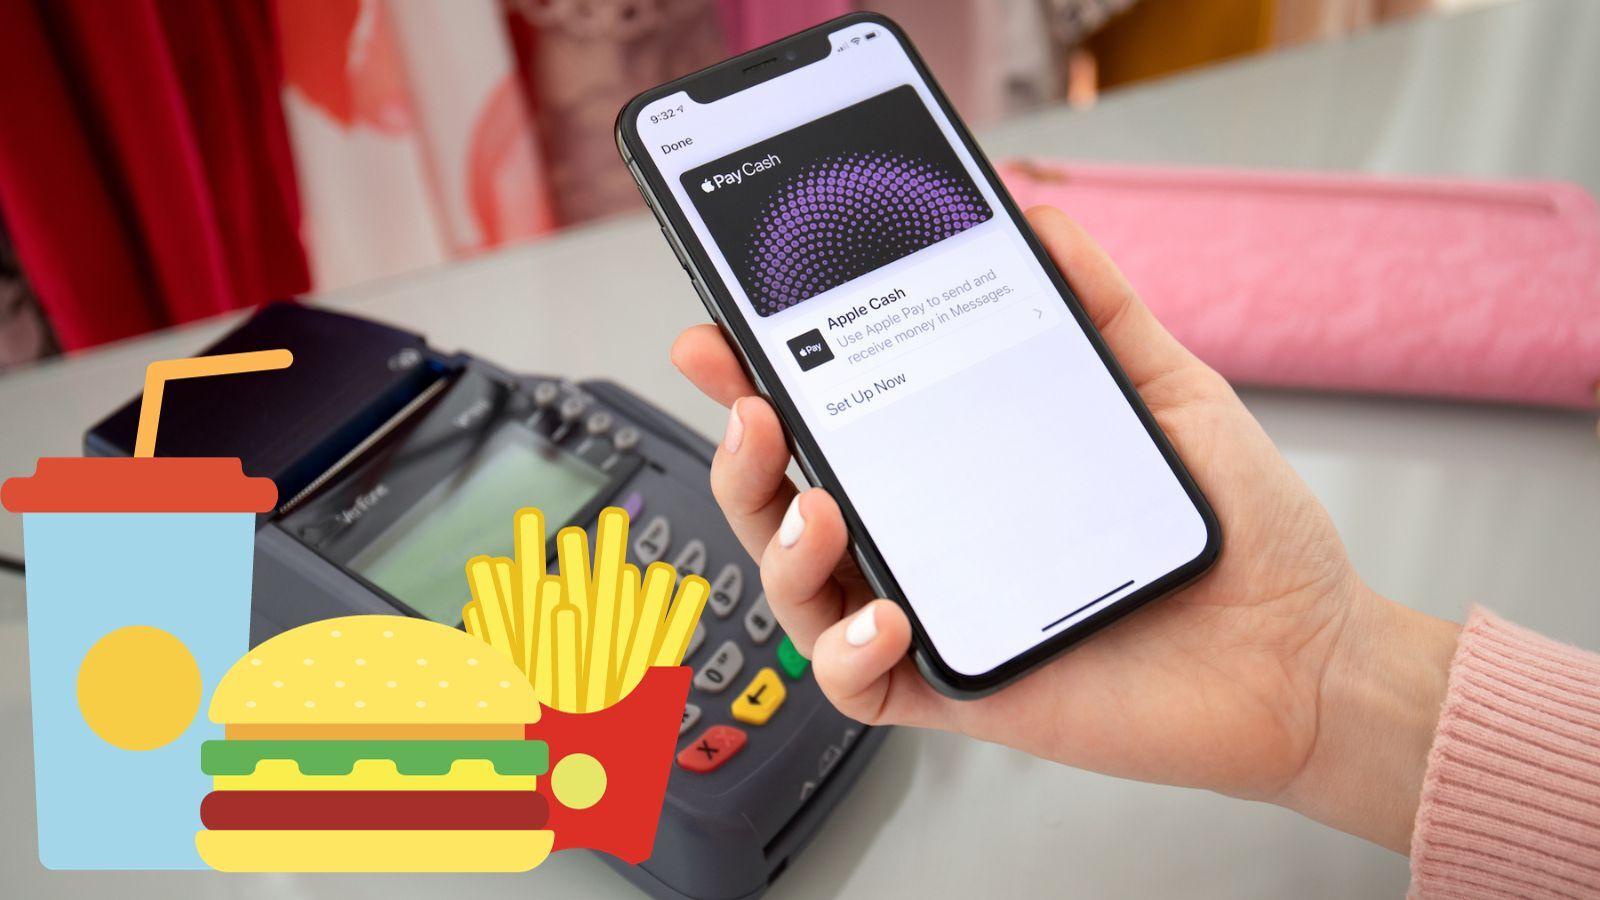 Does McDonald's Take Apple Pay? (Yes, Here Is the Full Guide)